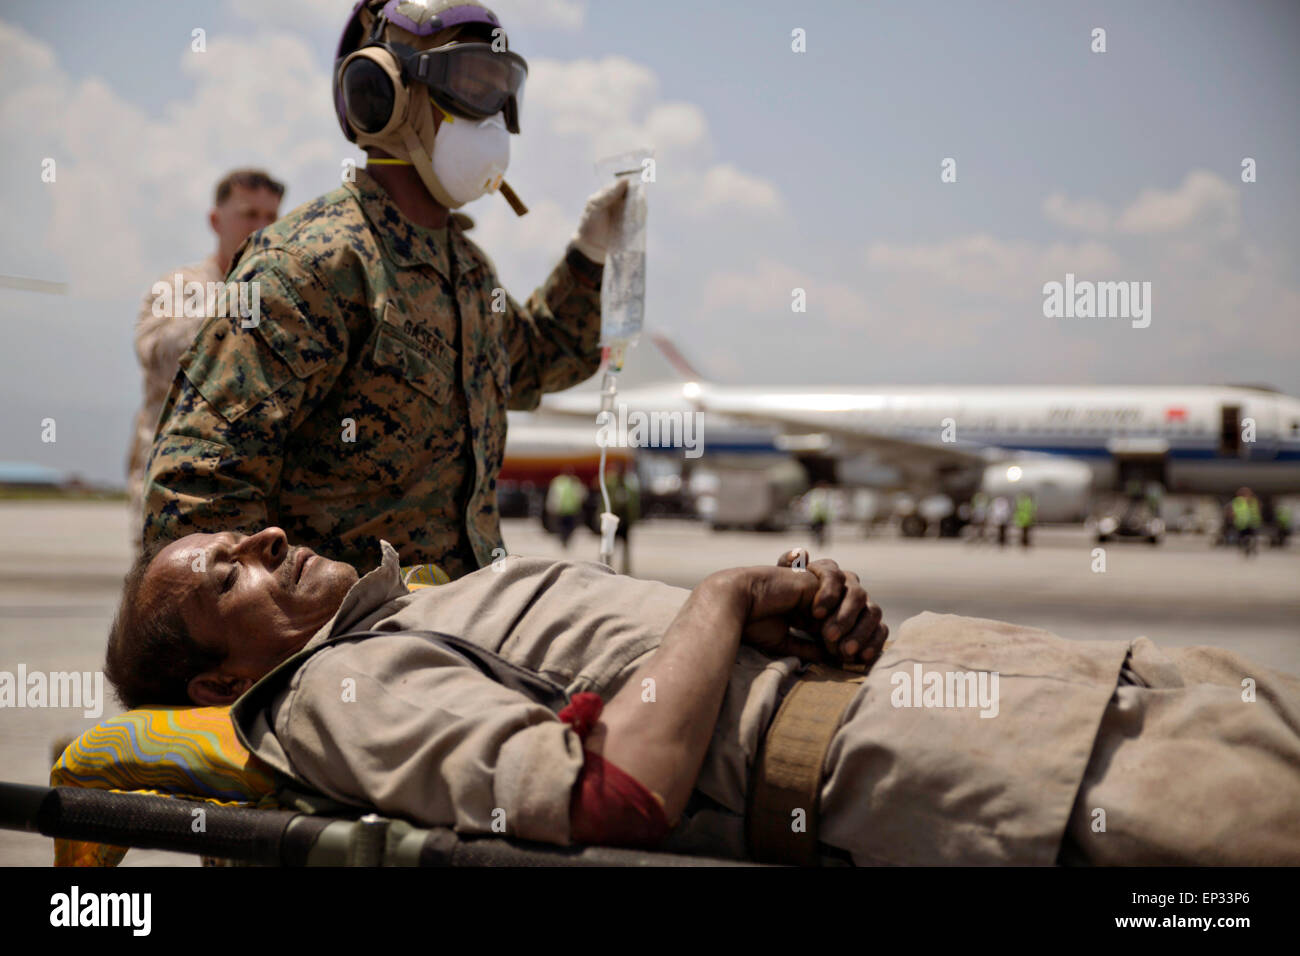 Kathmandu, Nepal. 13th May, 2015. A U.S. Marine helps carry a Nepalese man to a triage area at the Tribhuvan International Airport May 12, 2015 in Kathmandu, Nepal. A 7.3 magnitude aftershock earthquake struck the kingdom following the 7.8 magnitude earthquake on April 25th. Stock Photo